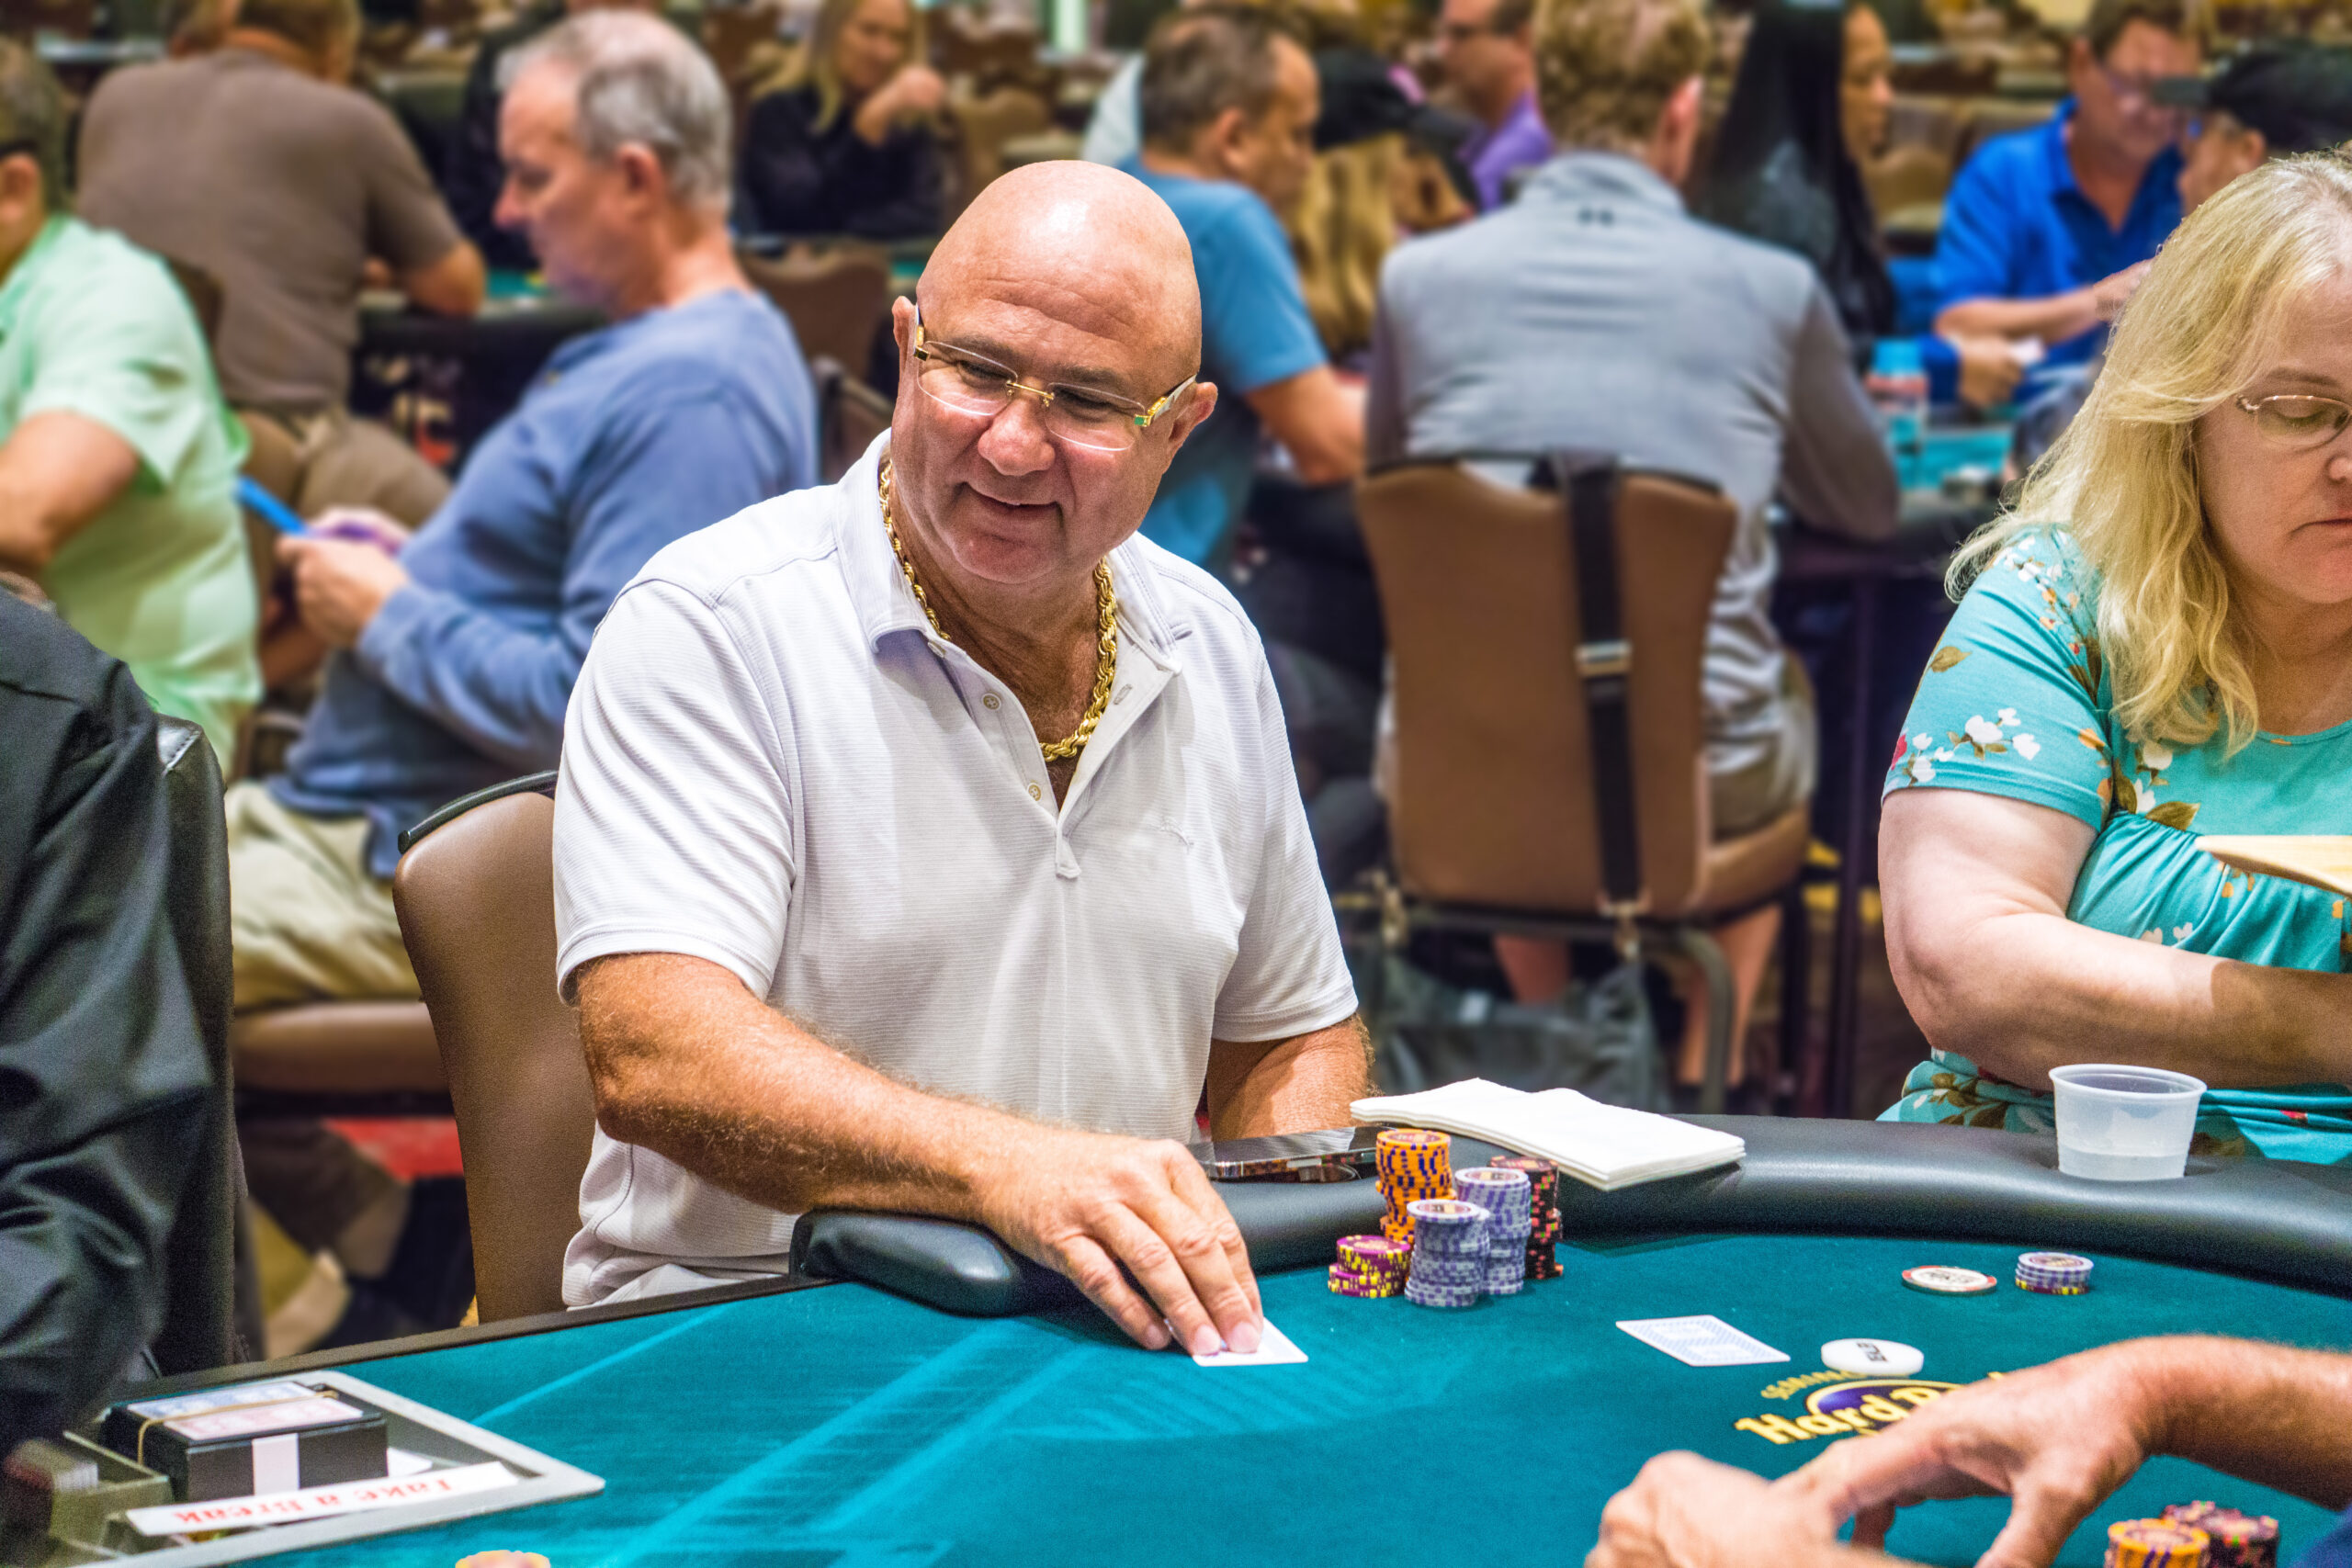 Occasion 2: Ernest Bush Leads the Field at the Dinner Break with 211,000